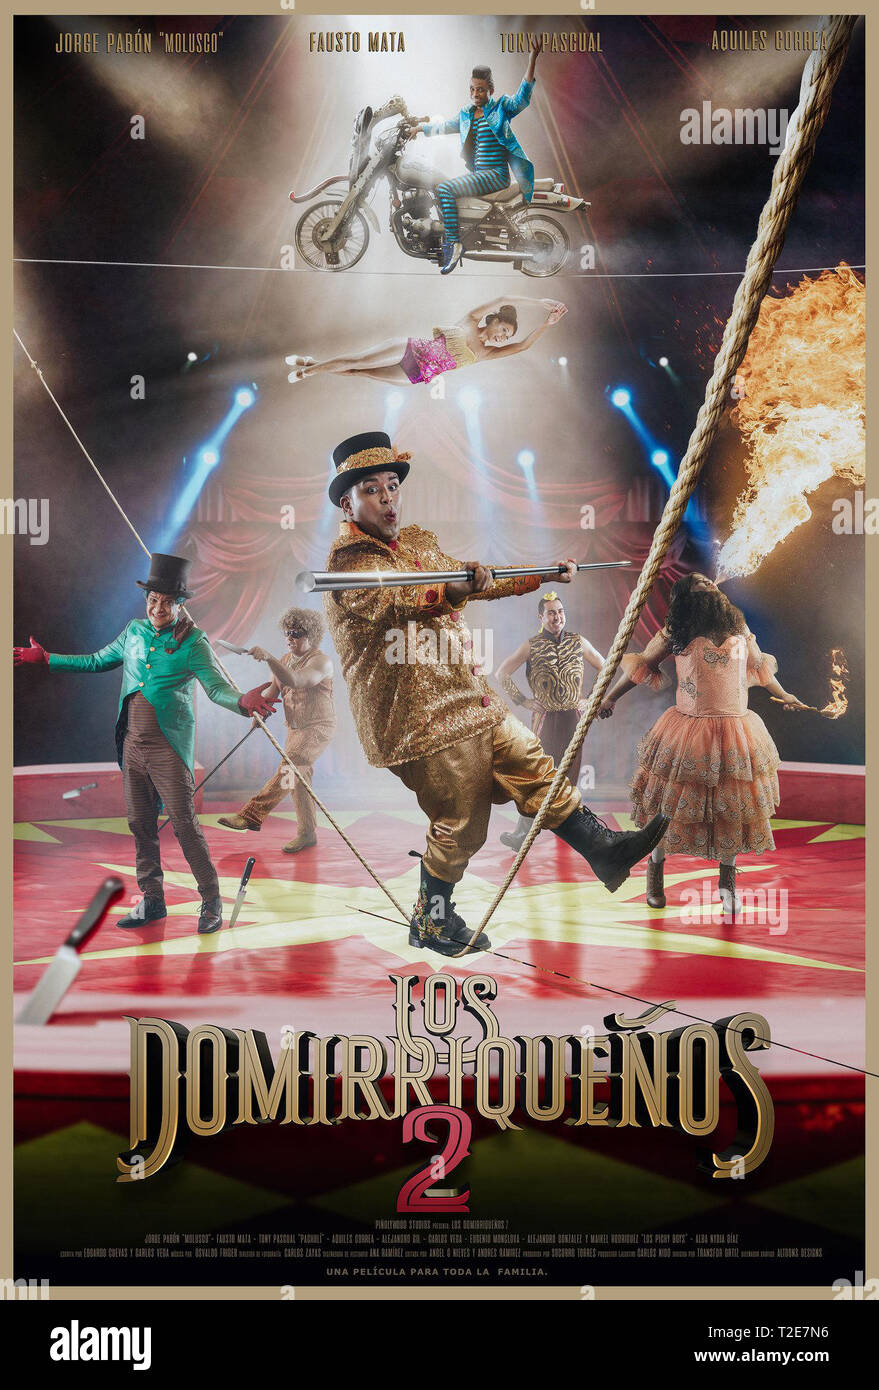 LOS DOMIRRIQUENOS 2, poster in Spanish, Jorge Pabon (large figure), Fausto Mata (on motorcycle), Stephany Liriano (flying), Tony Pascual (in green coat), 2019. © Spanglish Movies / Courtesy Everett Collection Stock Photo